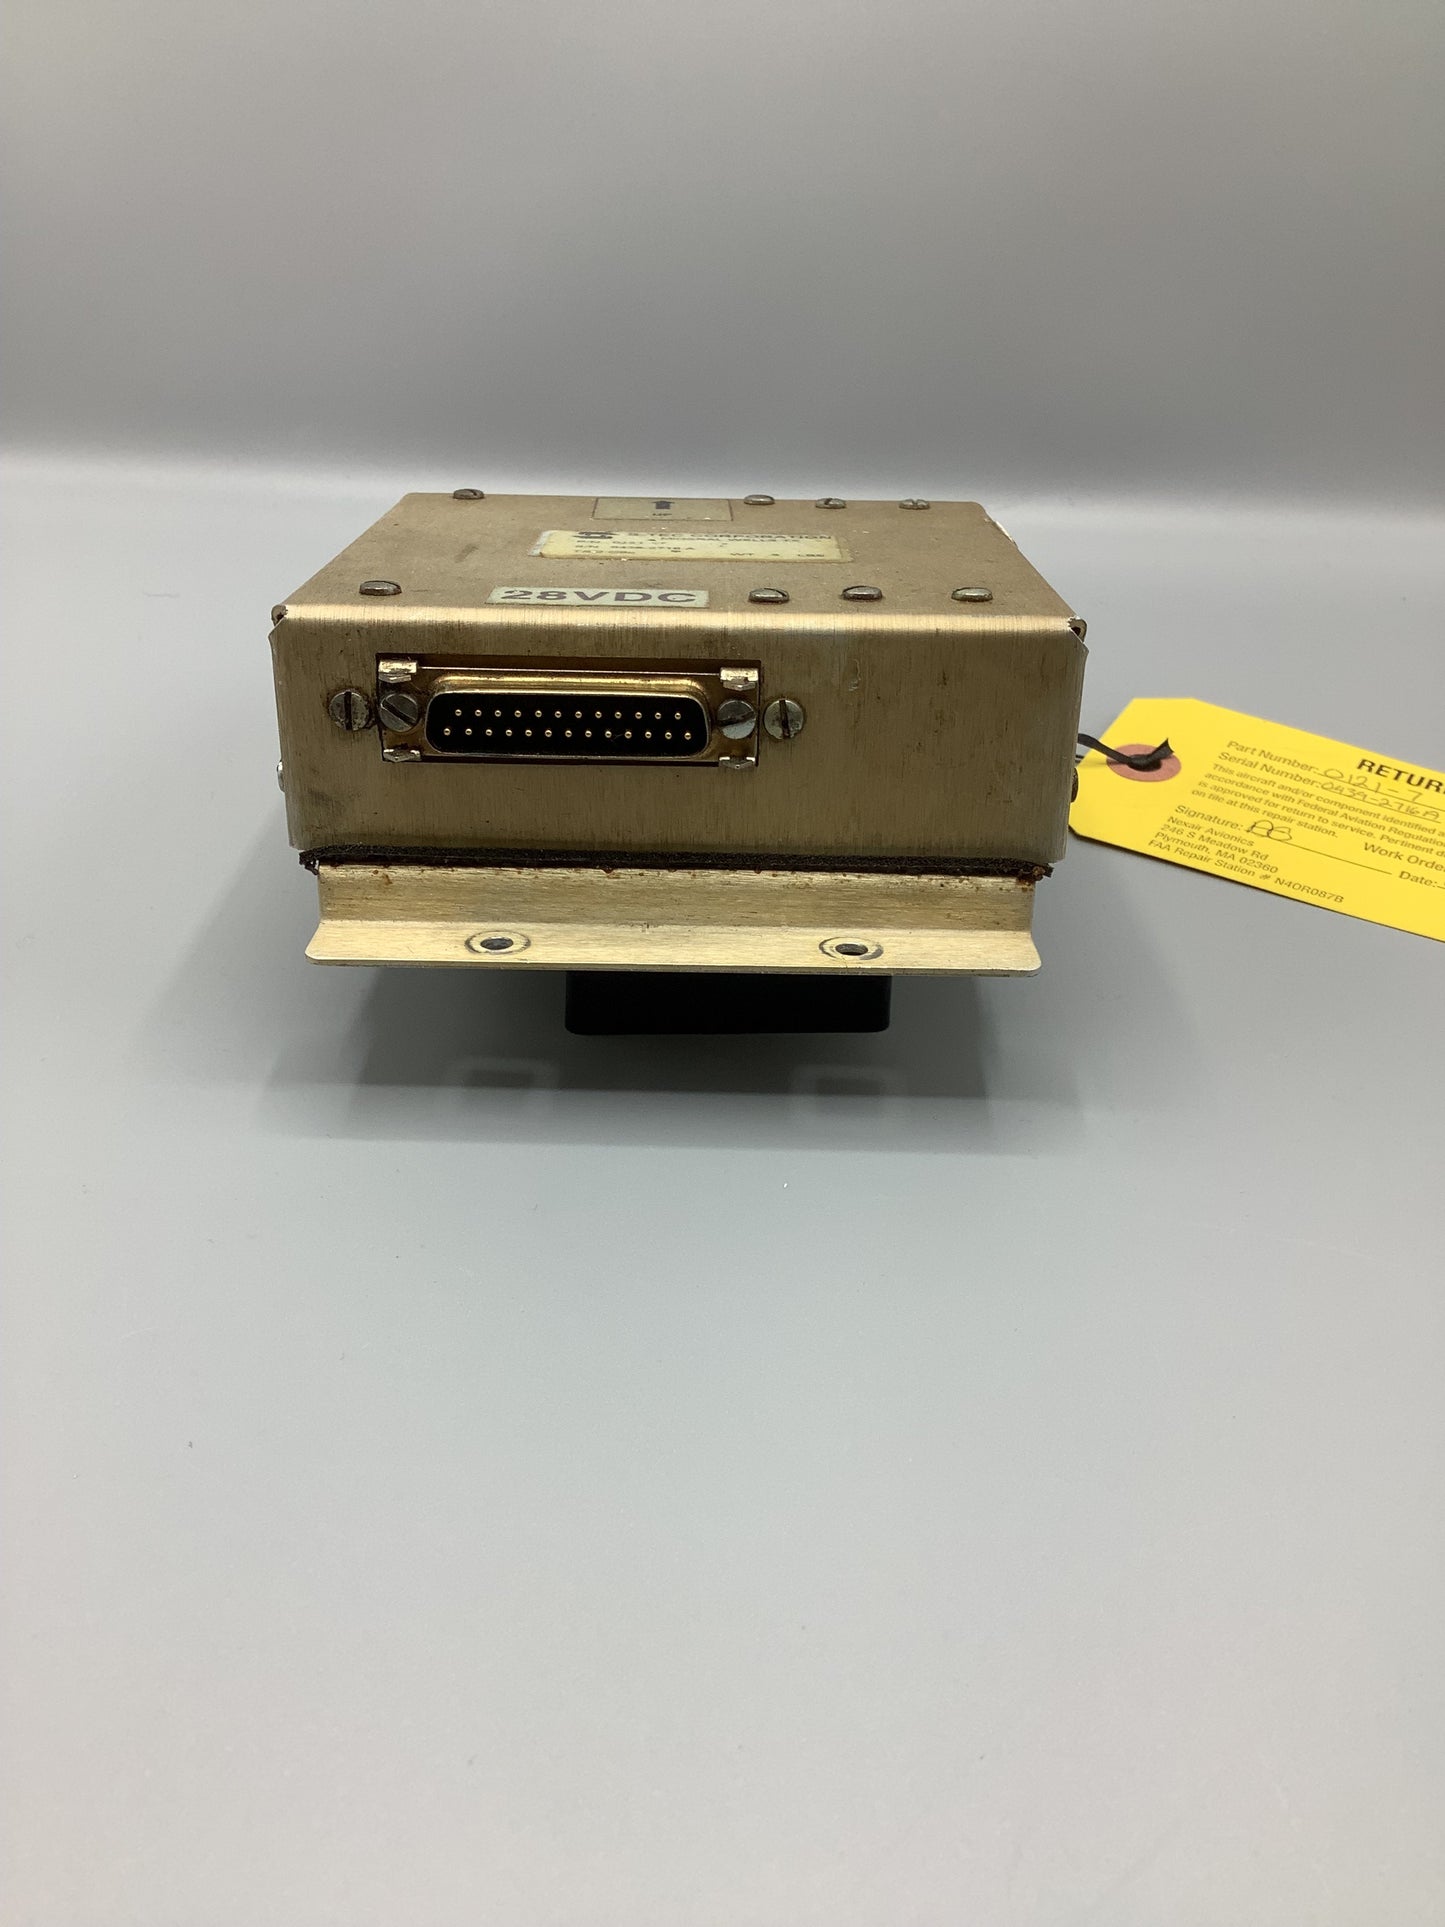 STEC Yaw Computer Amplifier - Part Number:0121-7